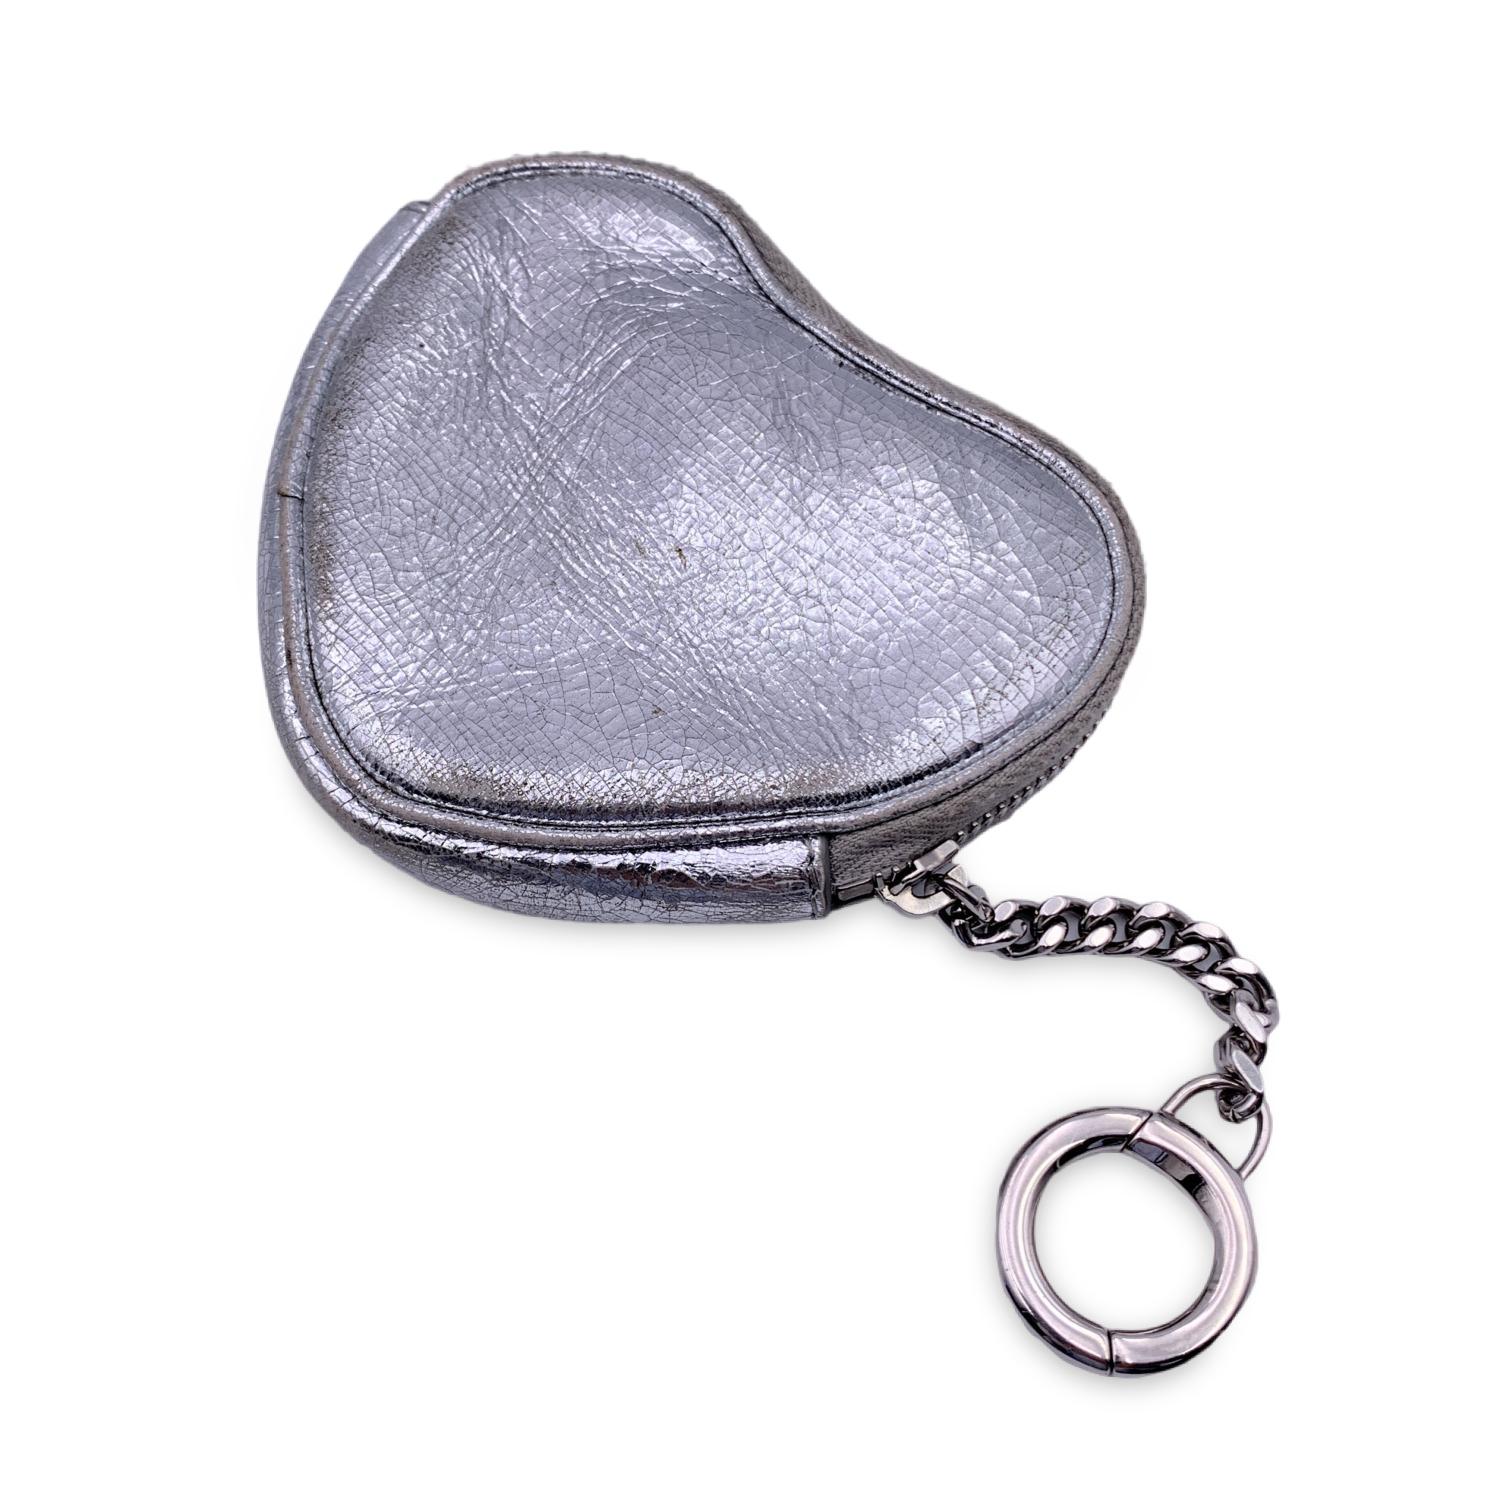 Women's Saint Laurent Silver Metal Leather Heart Coin Purse with Key Chain